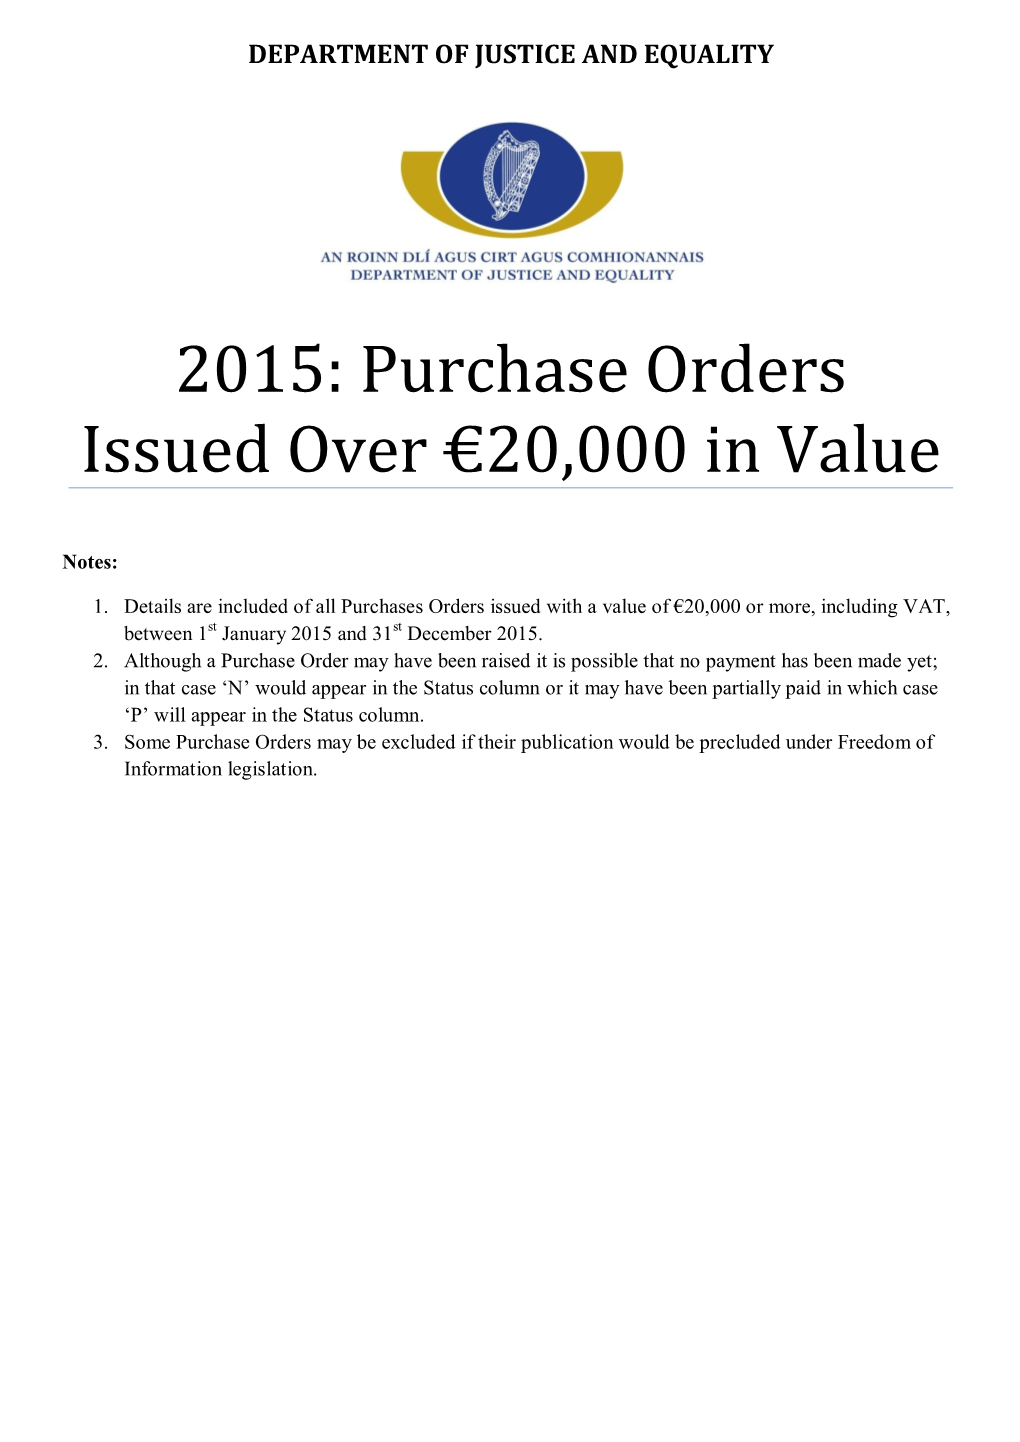 Purchase Orders Issued for Goods and Service Over €20K